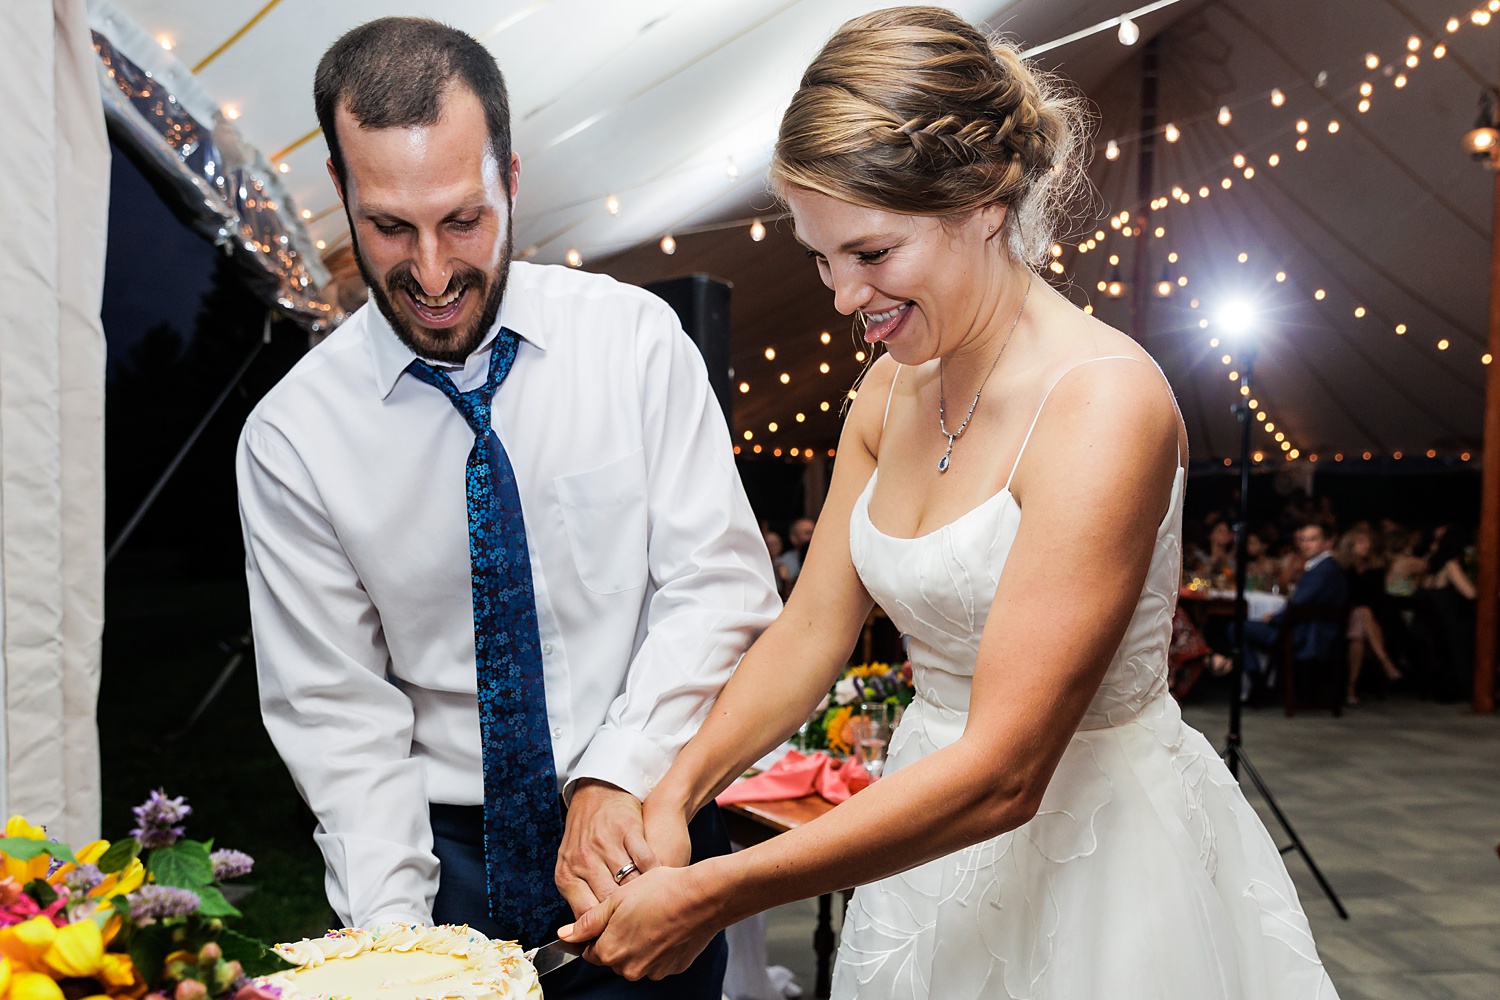 Cutting the wedding day cake under the tent